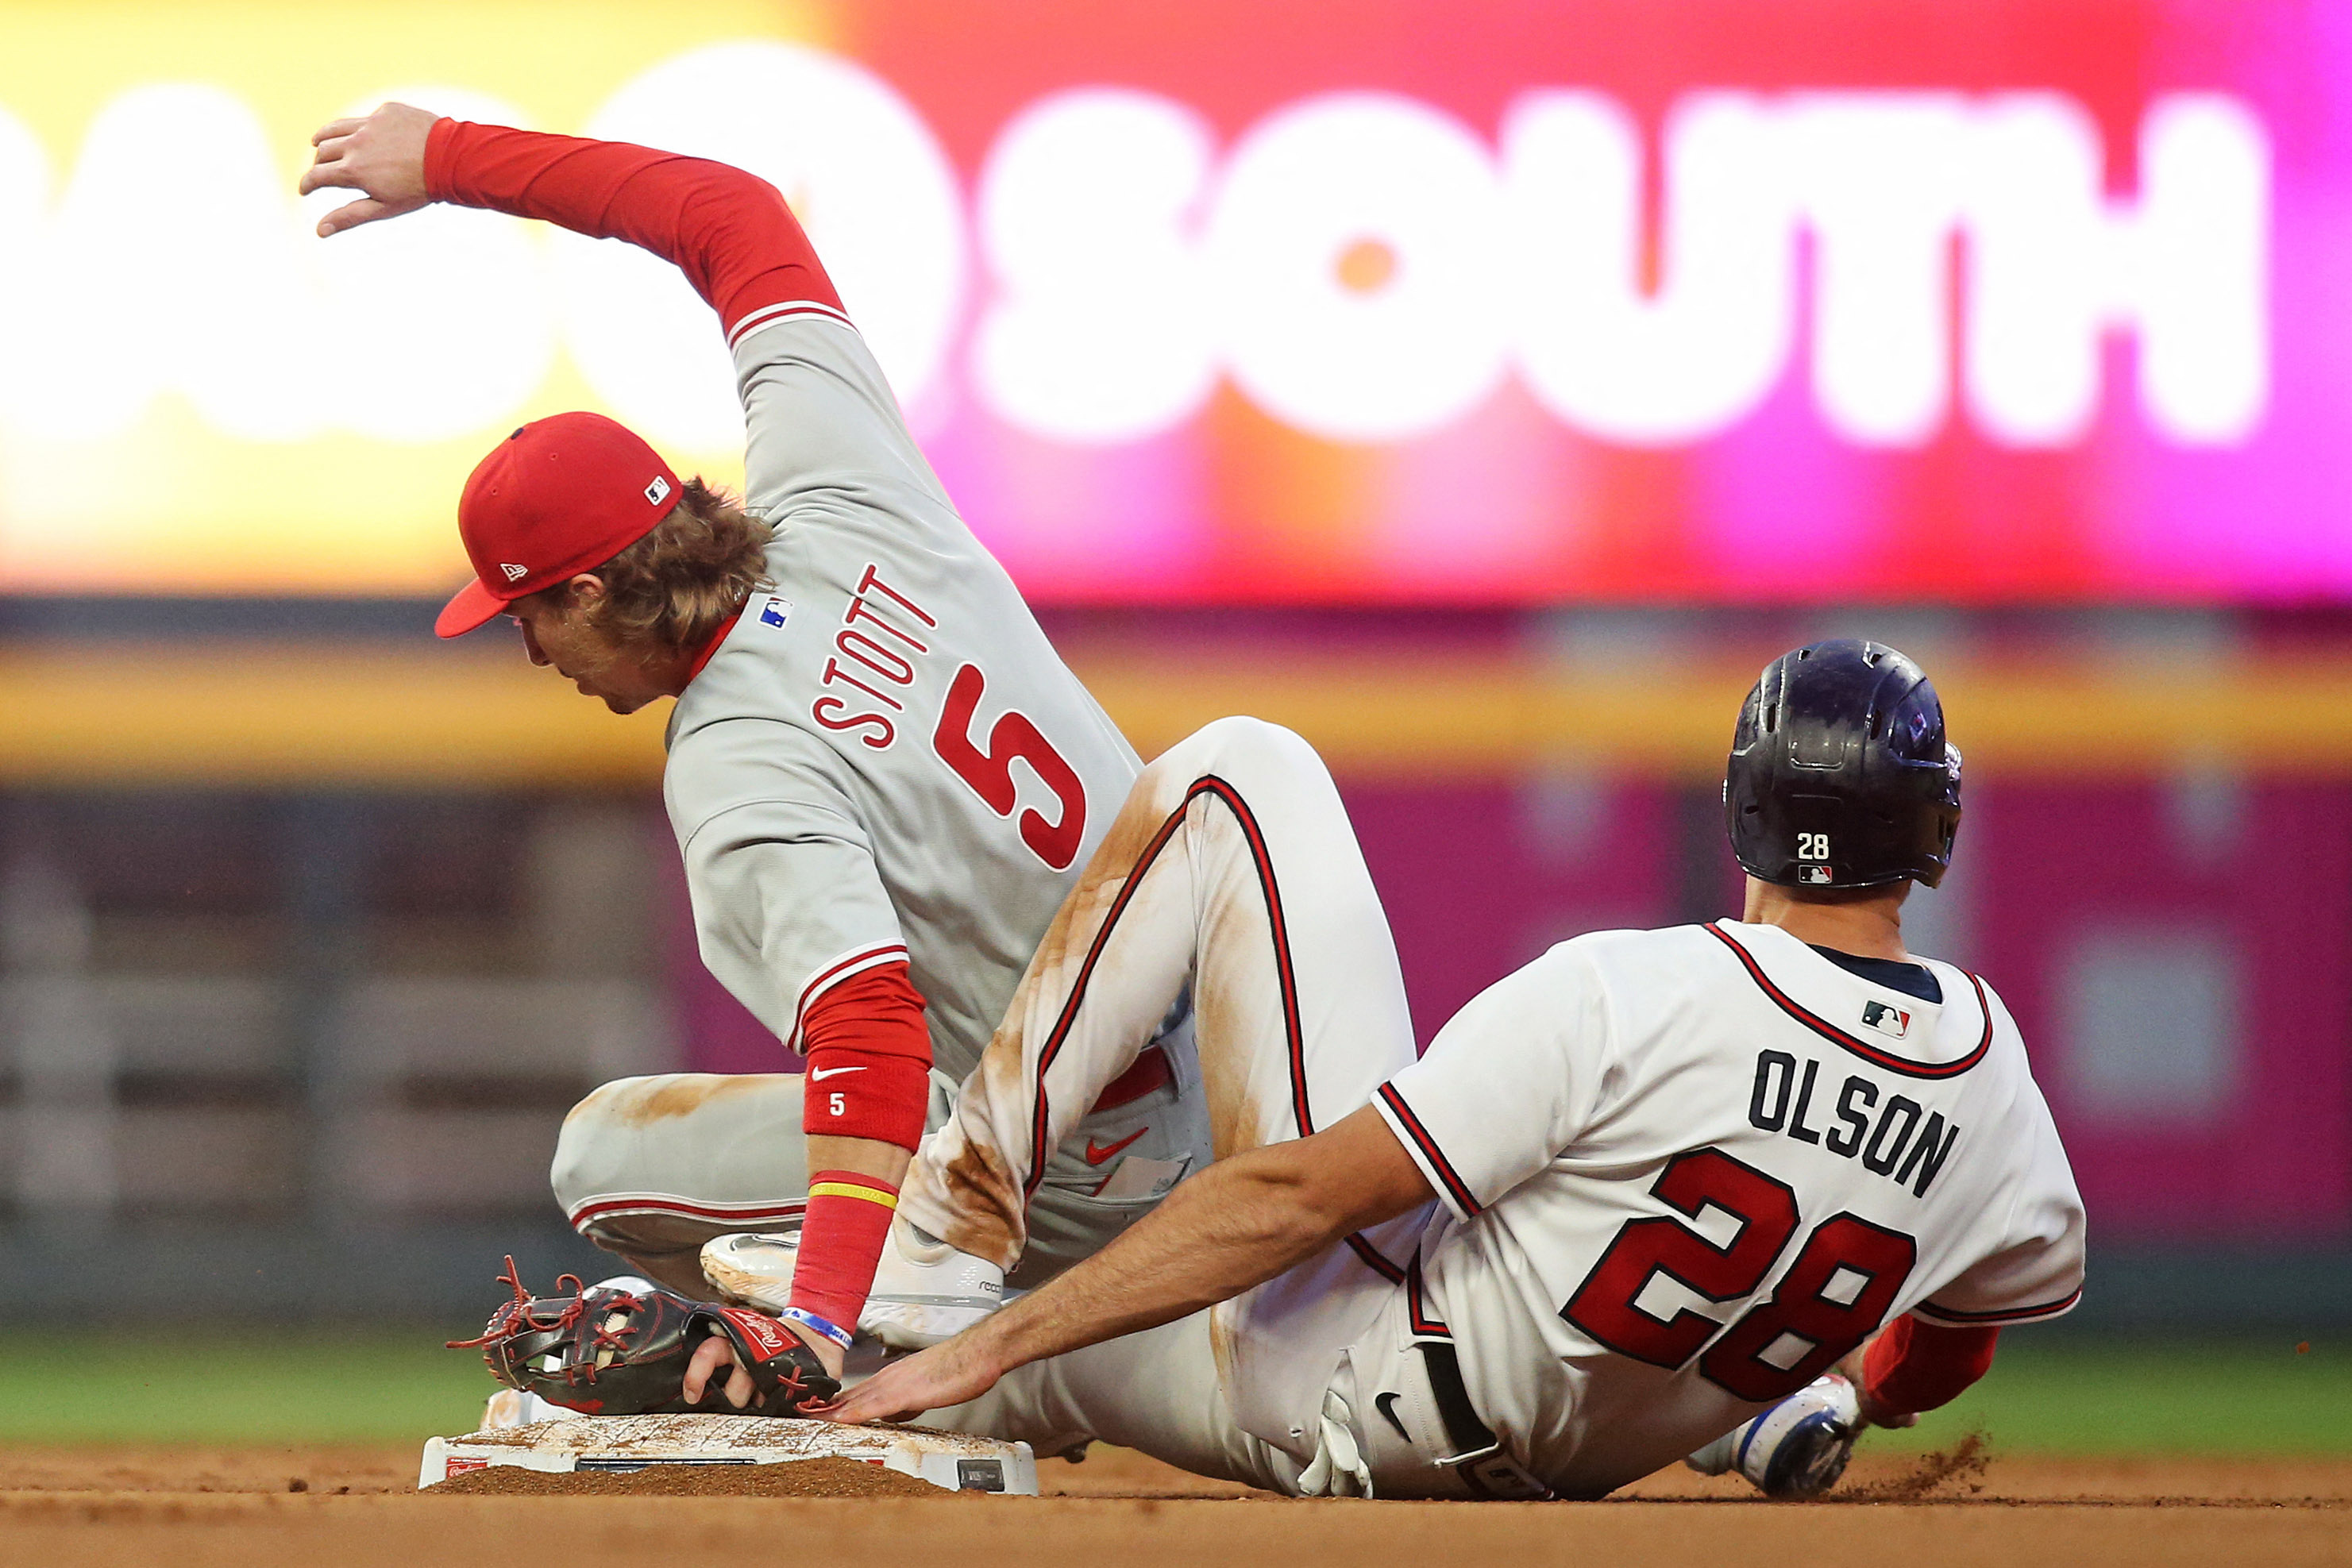 Stott leads Phillies to 6-4 comeback victory over Braves